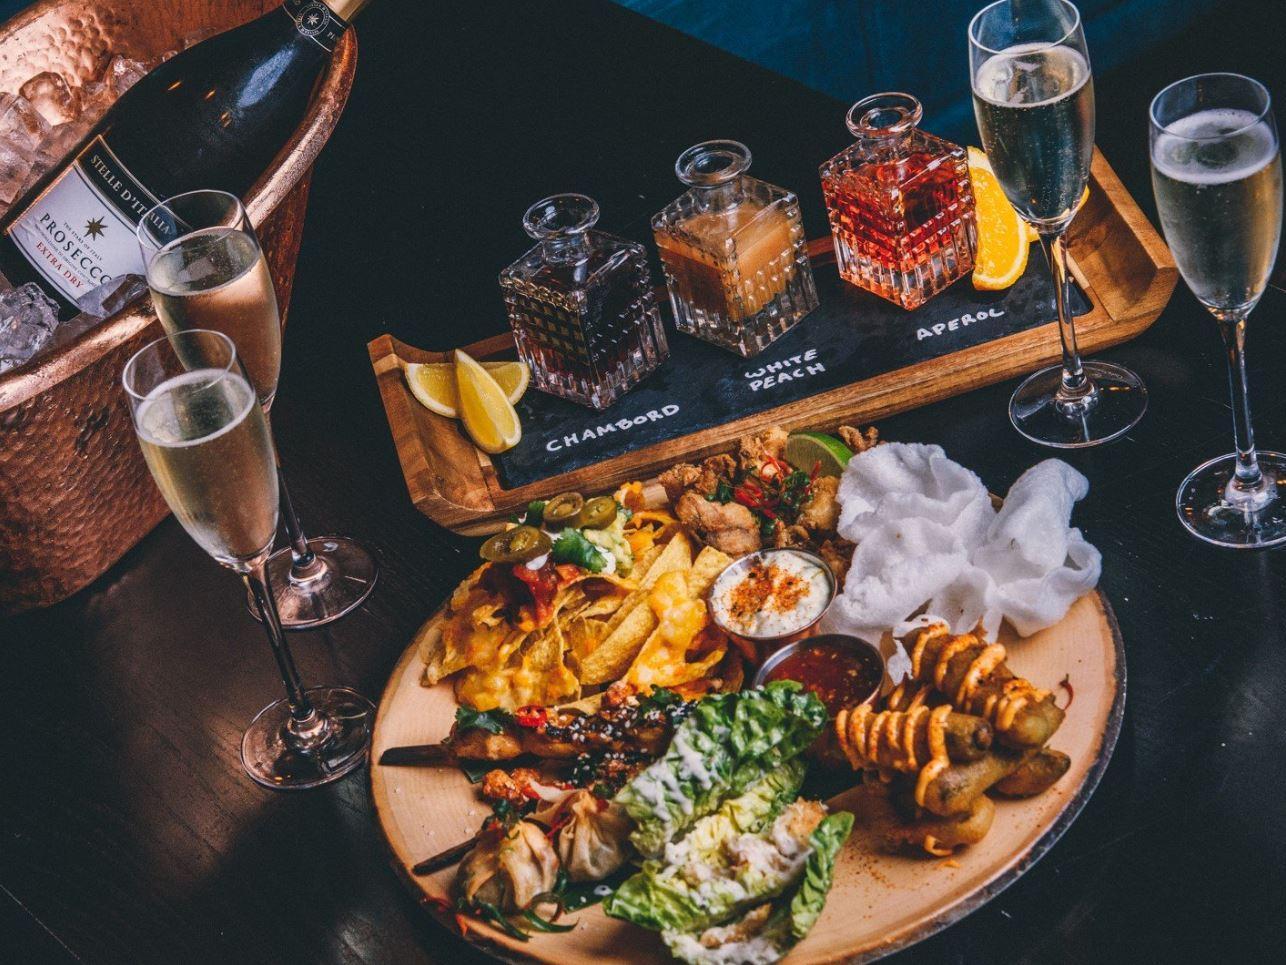 Served from 11am to 4pm every weekend, Manahatta offers unlimited prosecco, Bloody Marys, Aperol Spritzes and Pints of Coors alongside a menu of tasty egg and meat dishes.